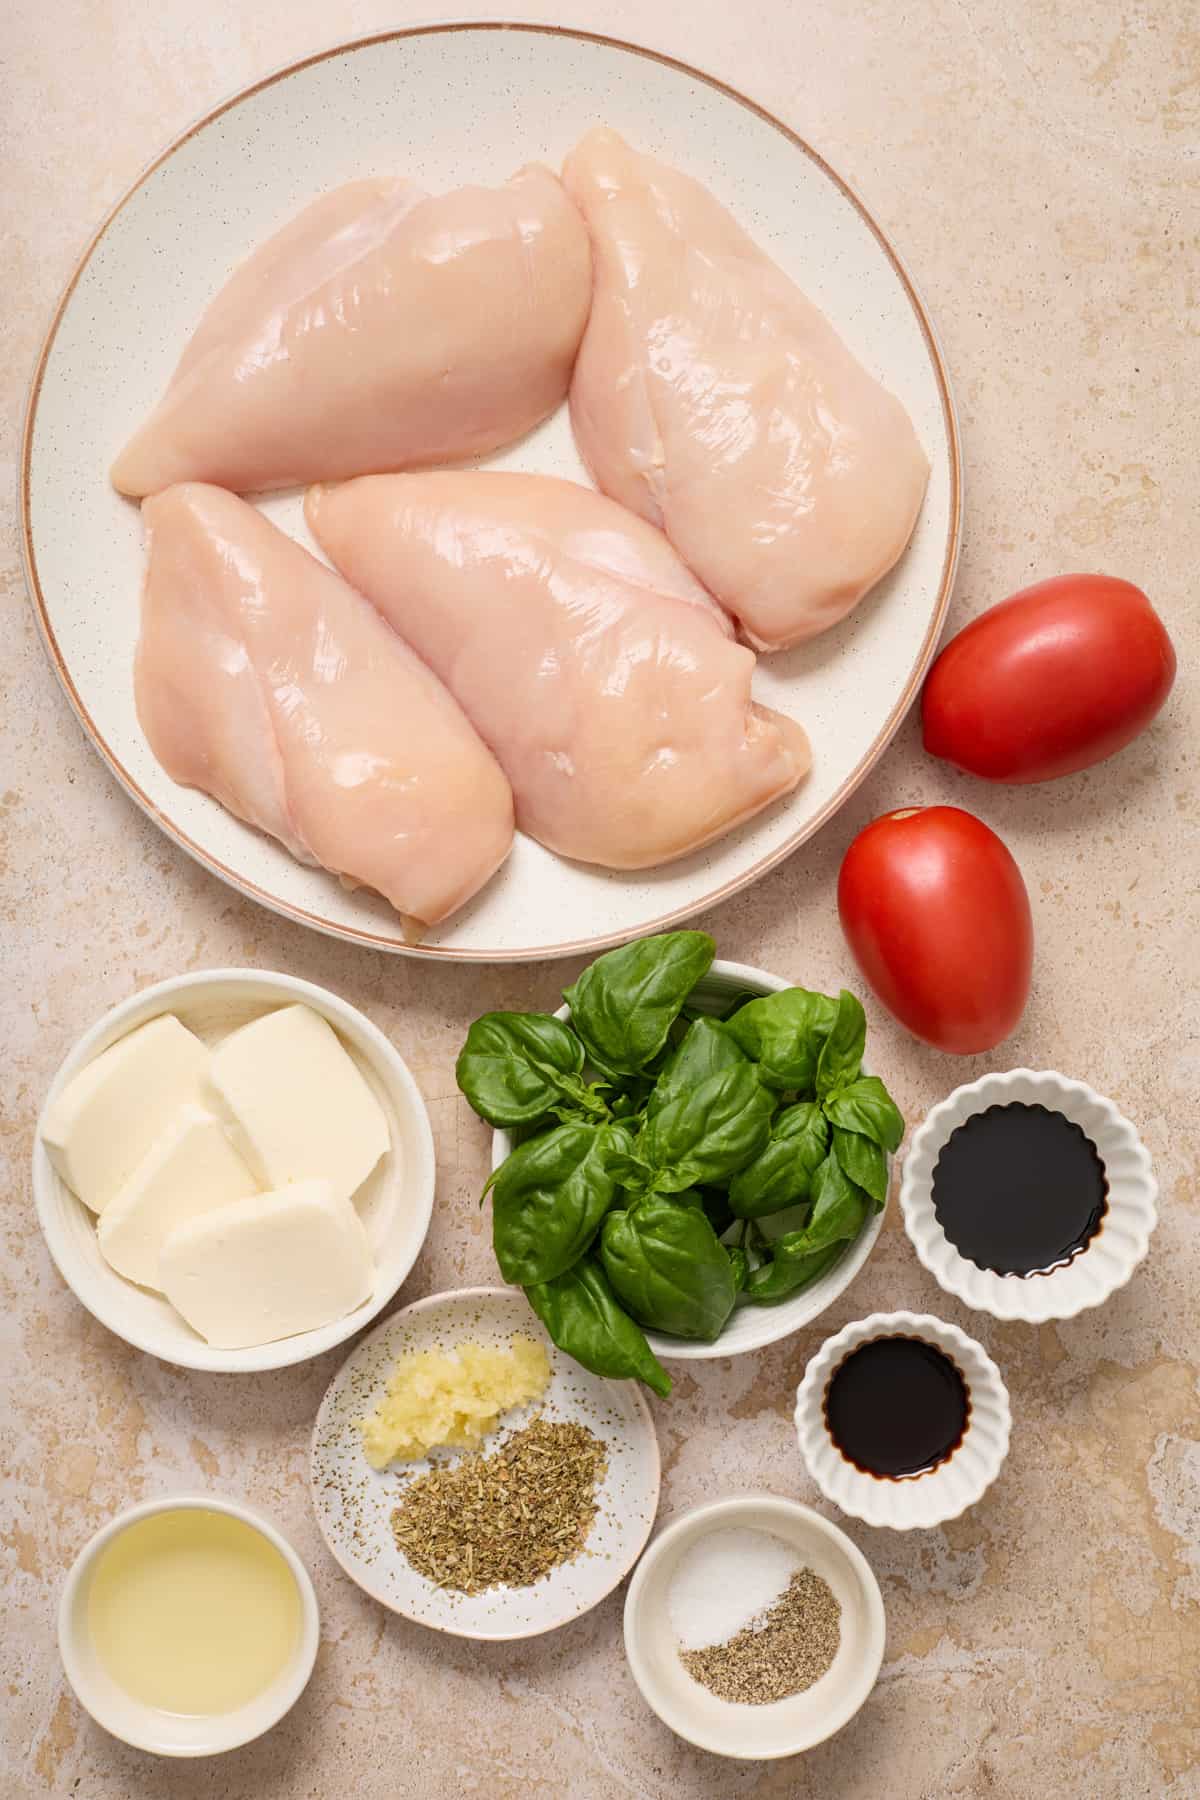 Chicken breast, mozzarella, sliced tomato, basil and other ingredients arranged on surface for recipe.